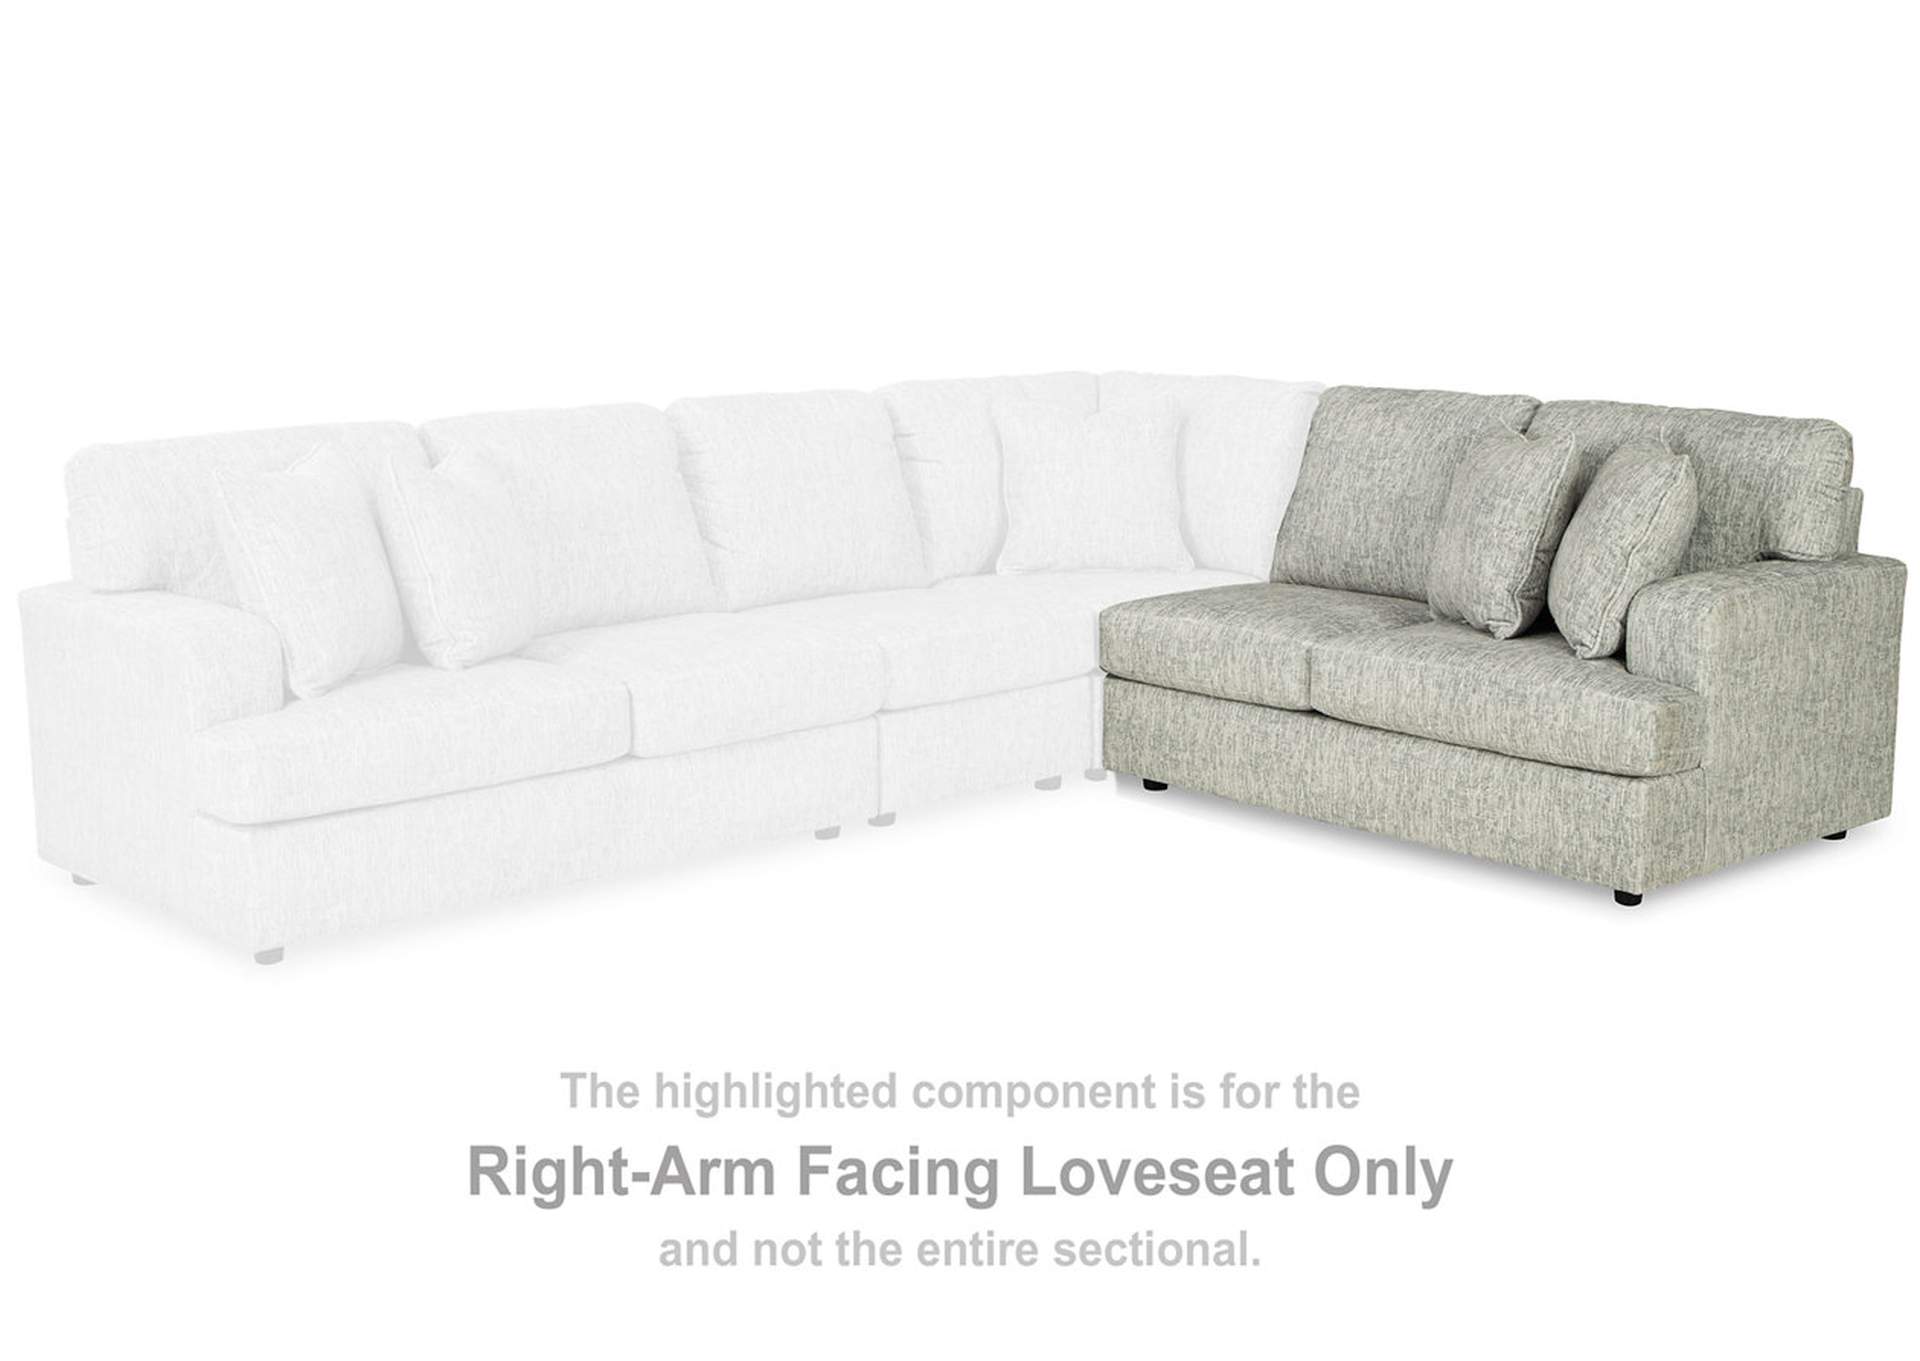 Playwrite 4-Piece Sectional,Signature Design By Ashley